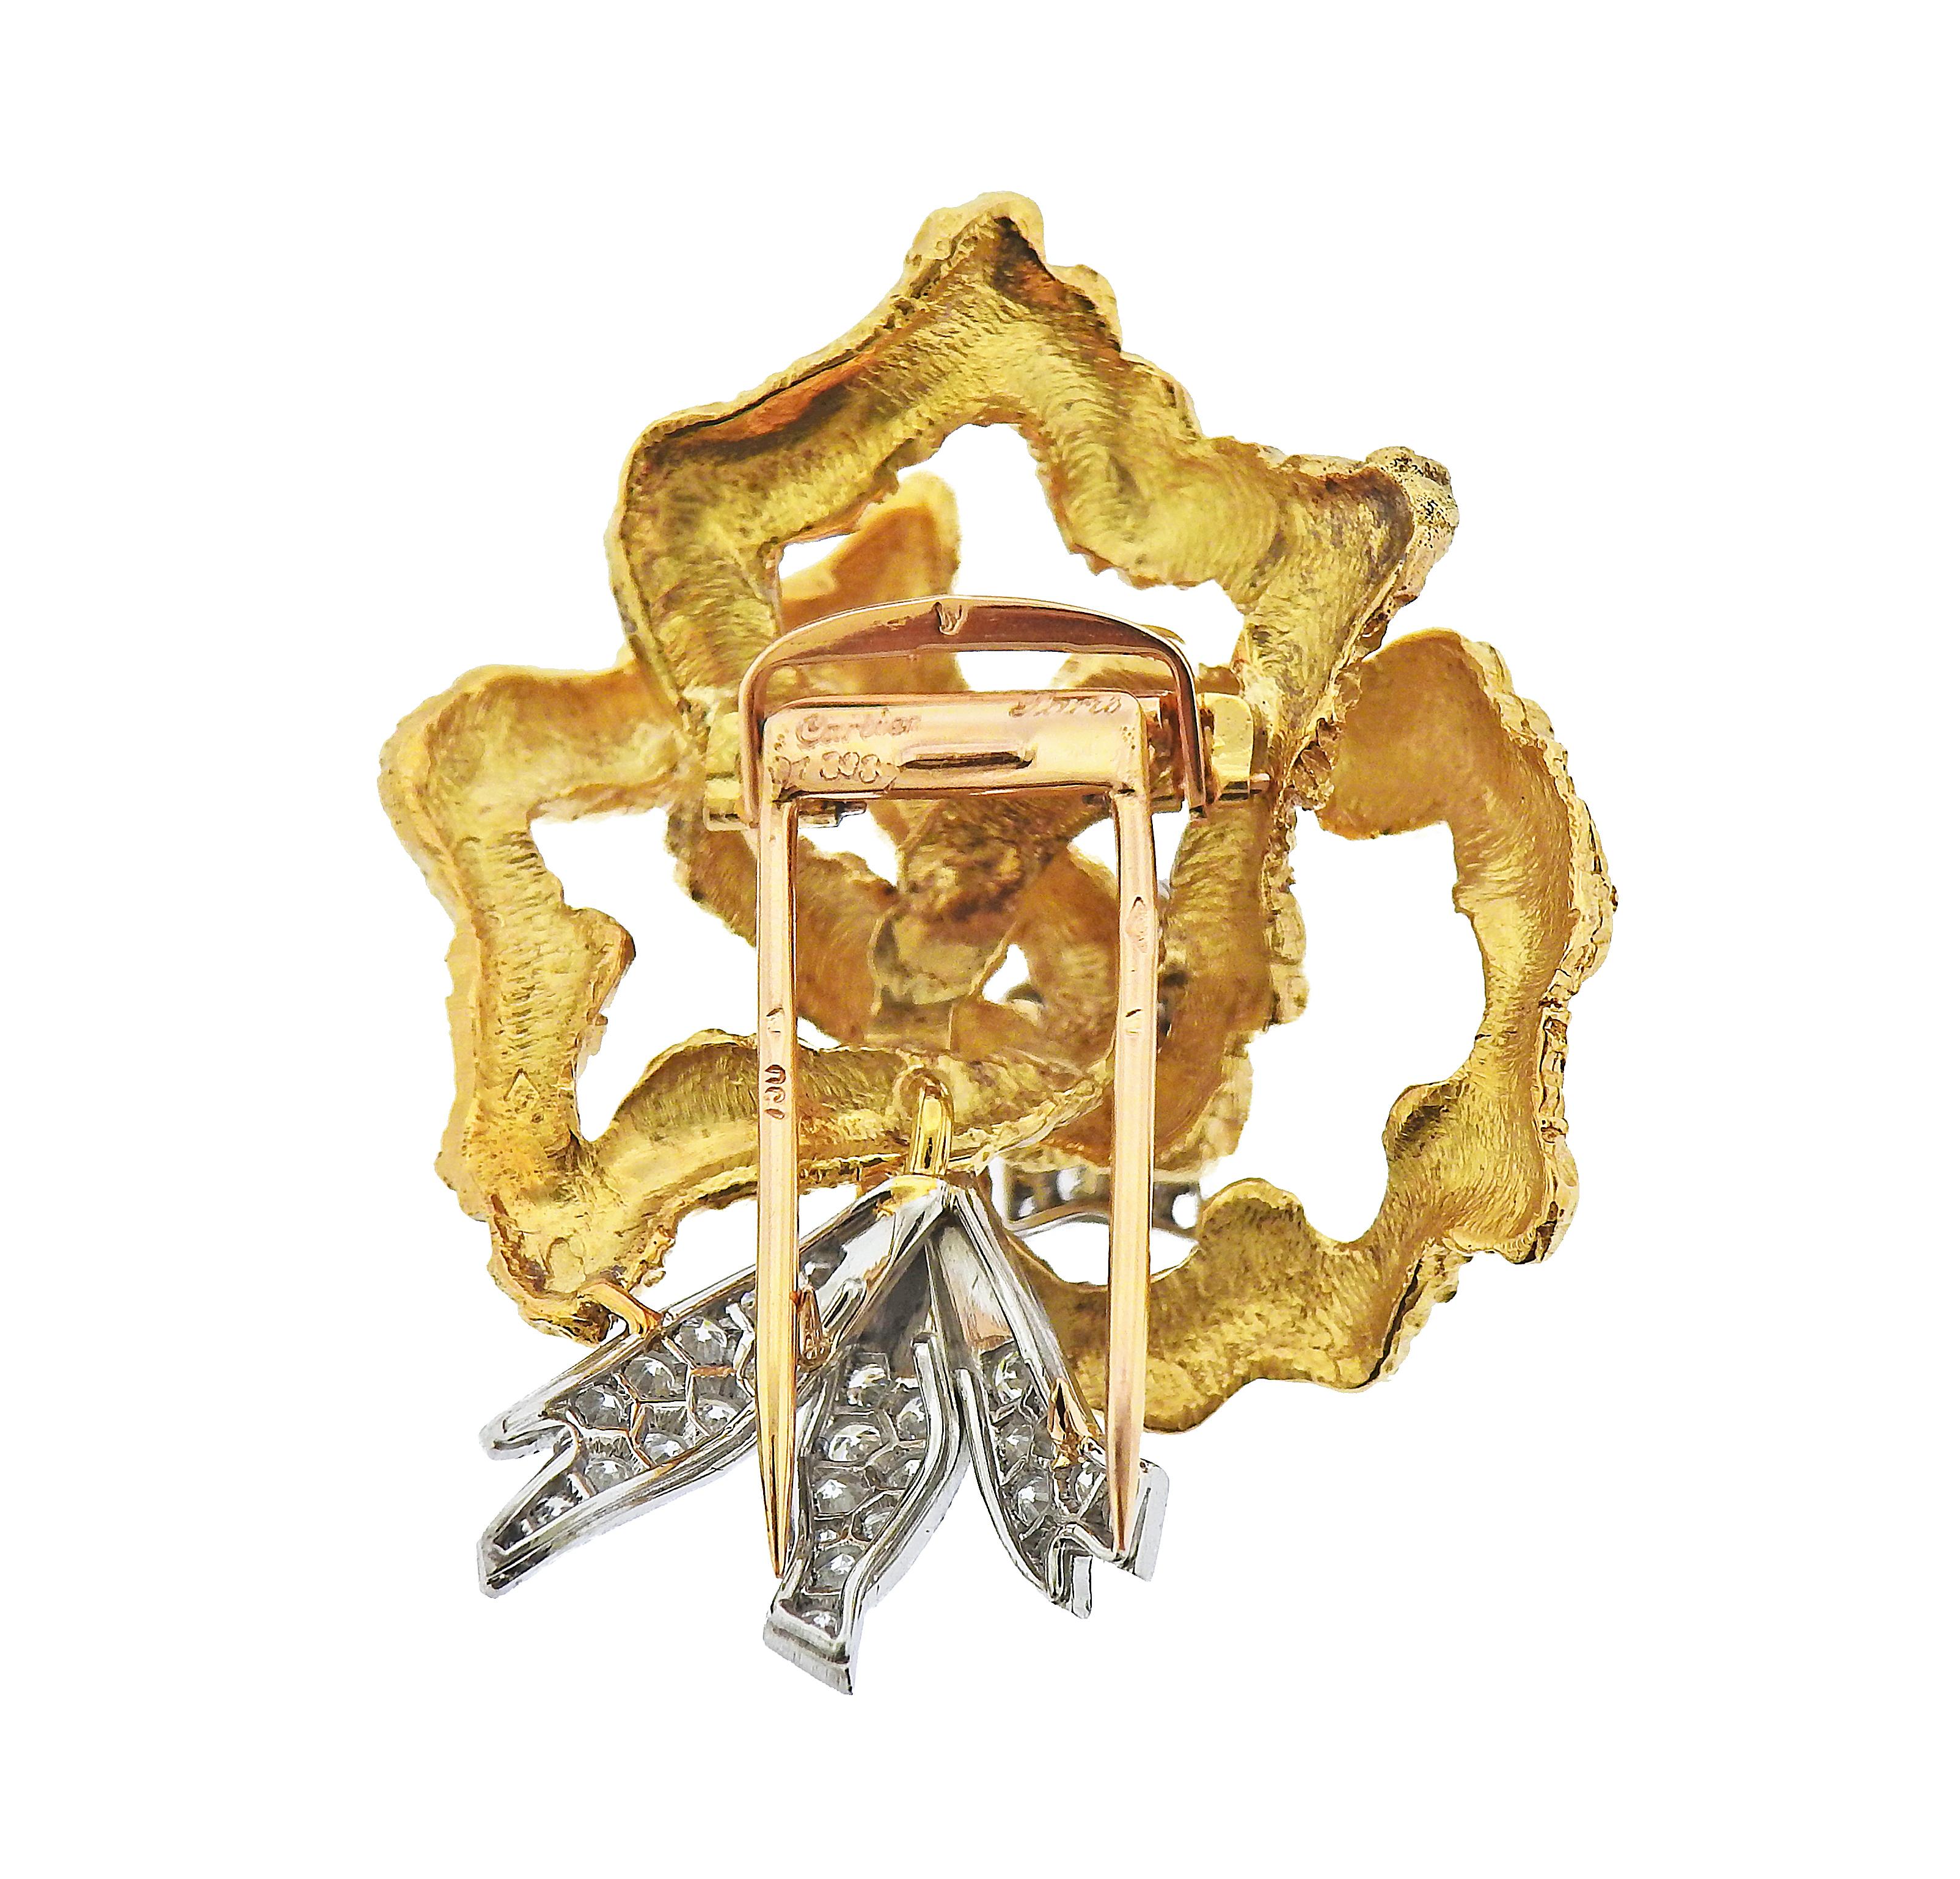 Cartier Paris 18k gold and platinum brooch, adorned with approx. 1.10ctw in diamonds. Brooch measures 43mm x 35mm. Marked: Cartier Paris, French marks on stem, 01 336. Weight - 21 grams.